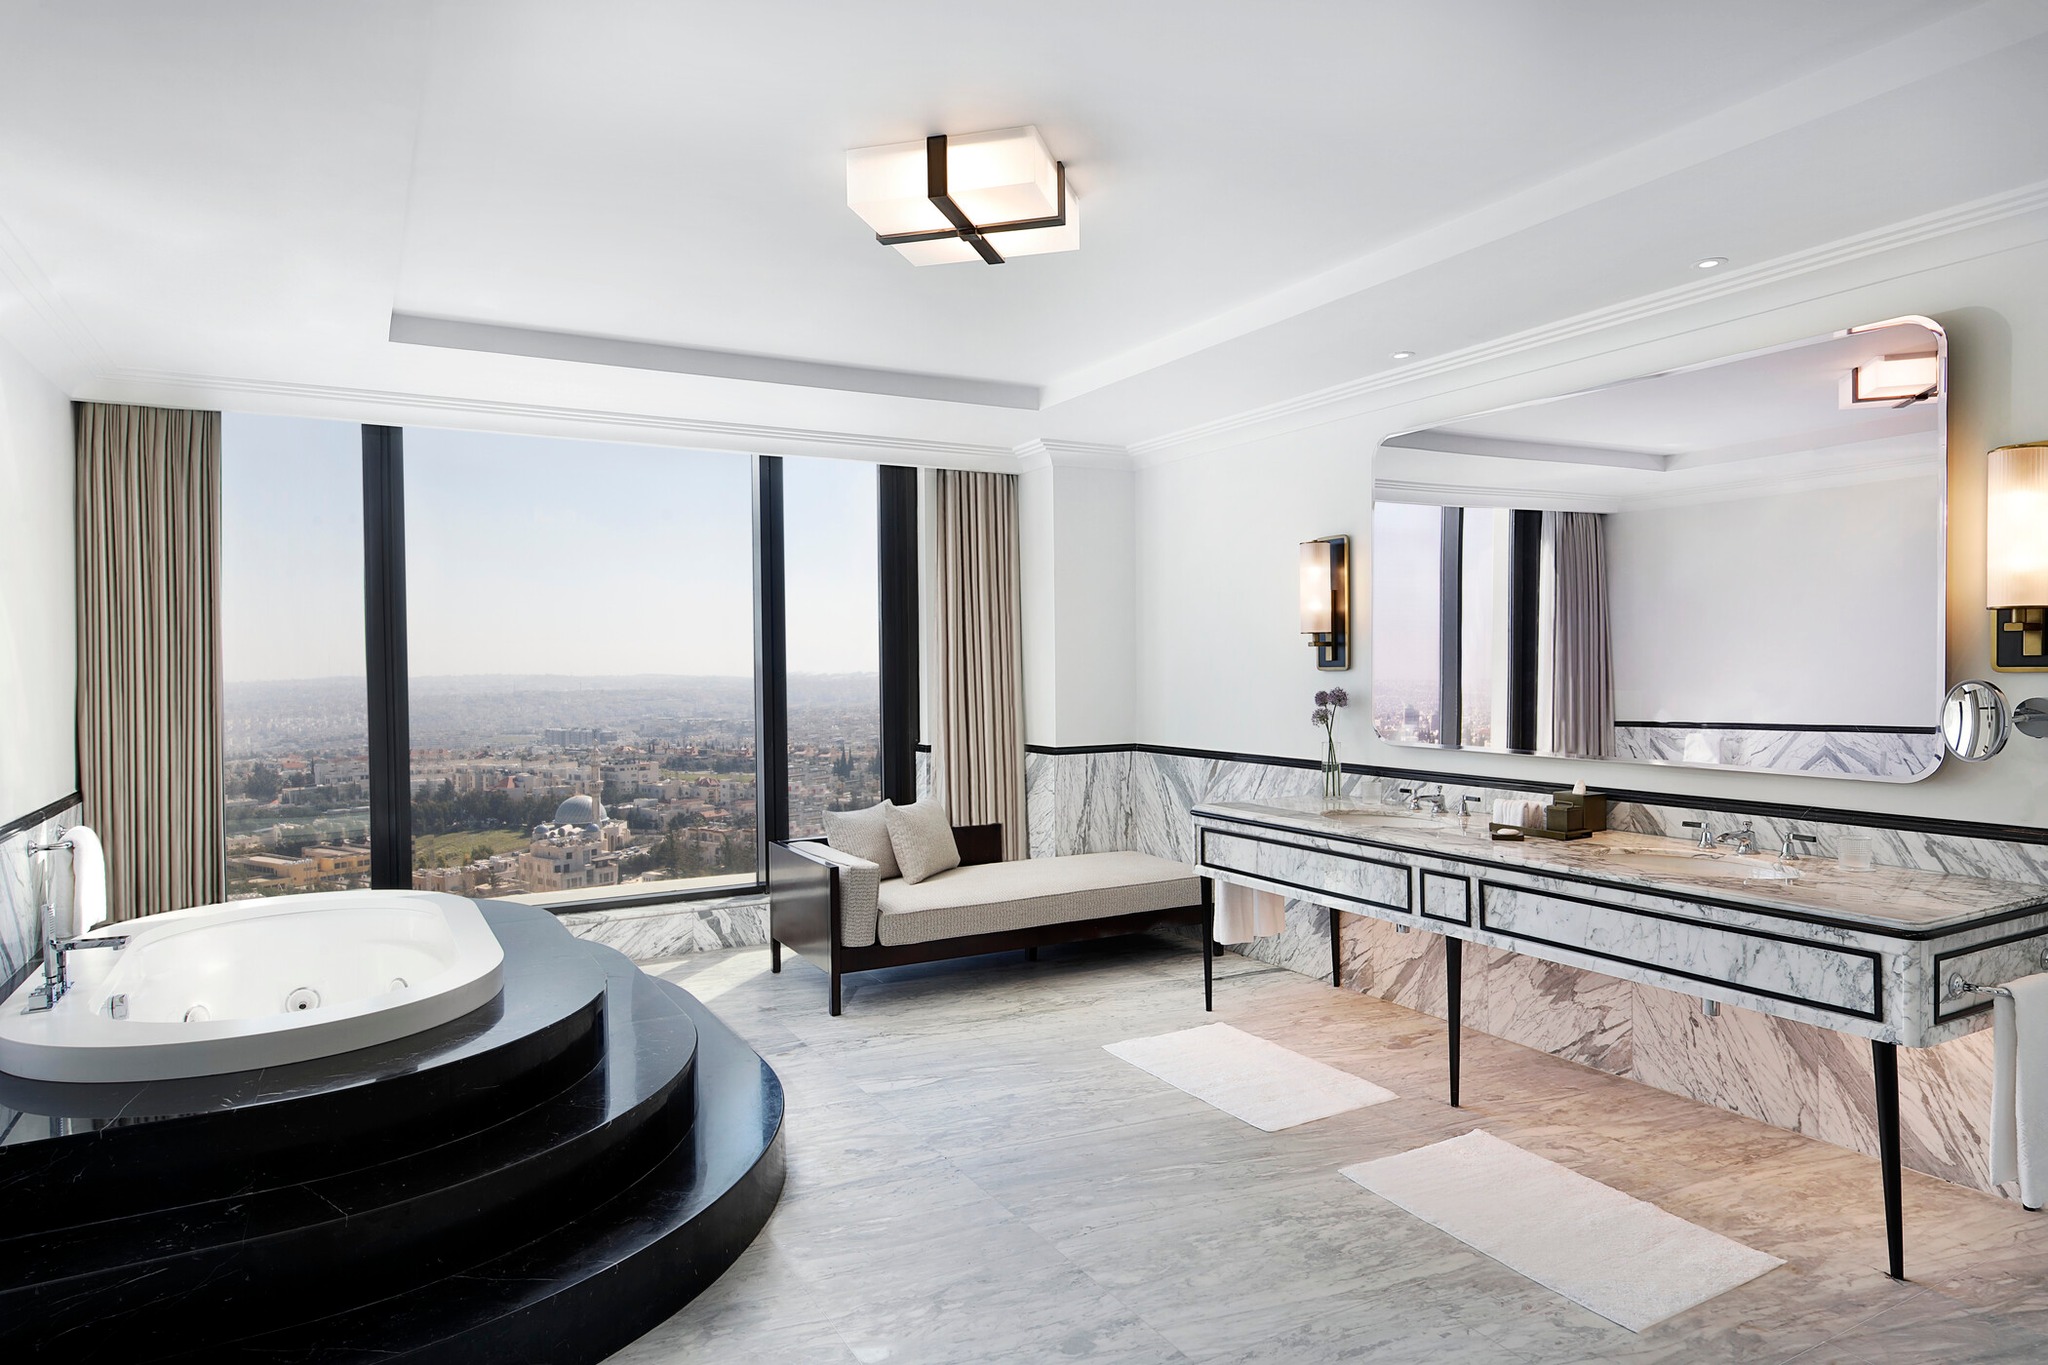 The St. Regis Amman Hotel is a luxurious 5-star hotel located in the heart of the capital city of Jordan, Amman